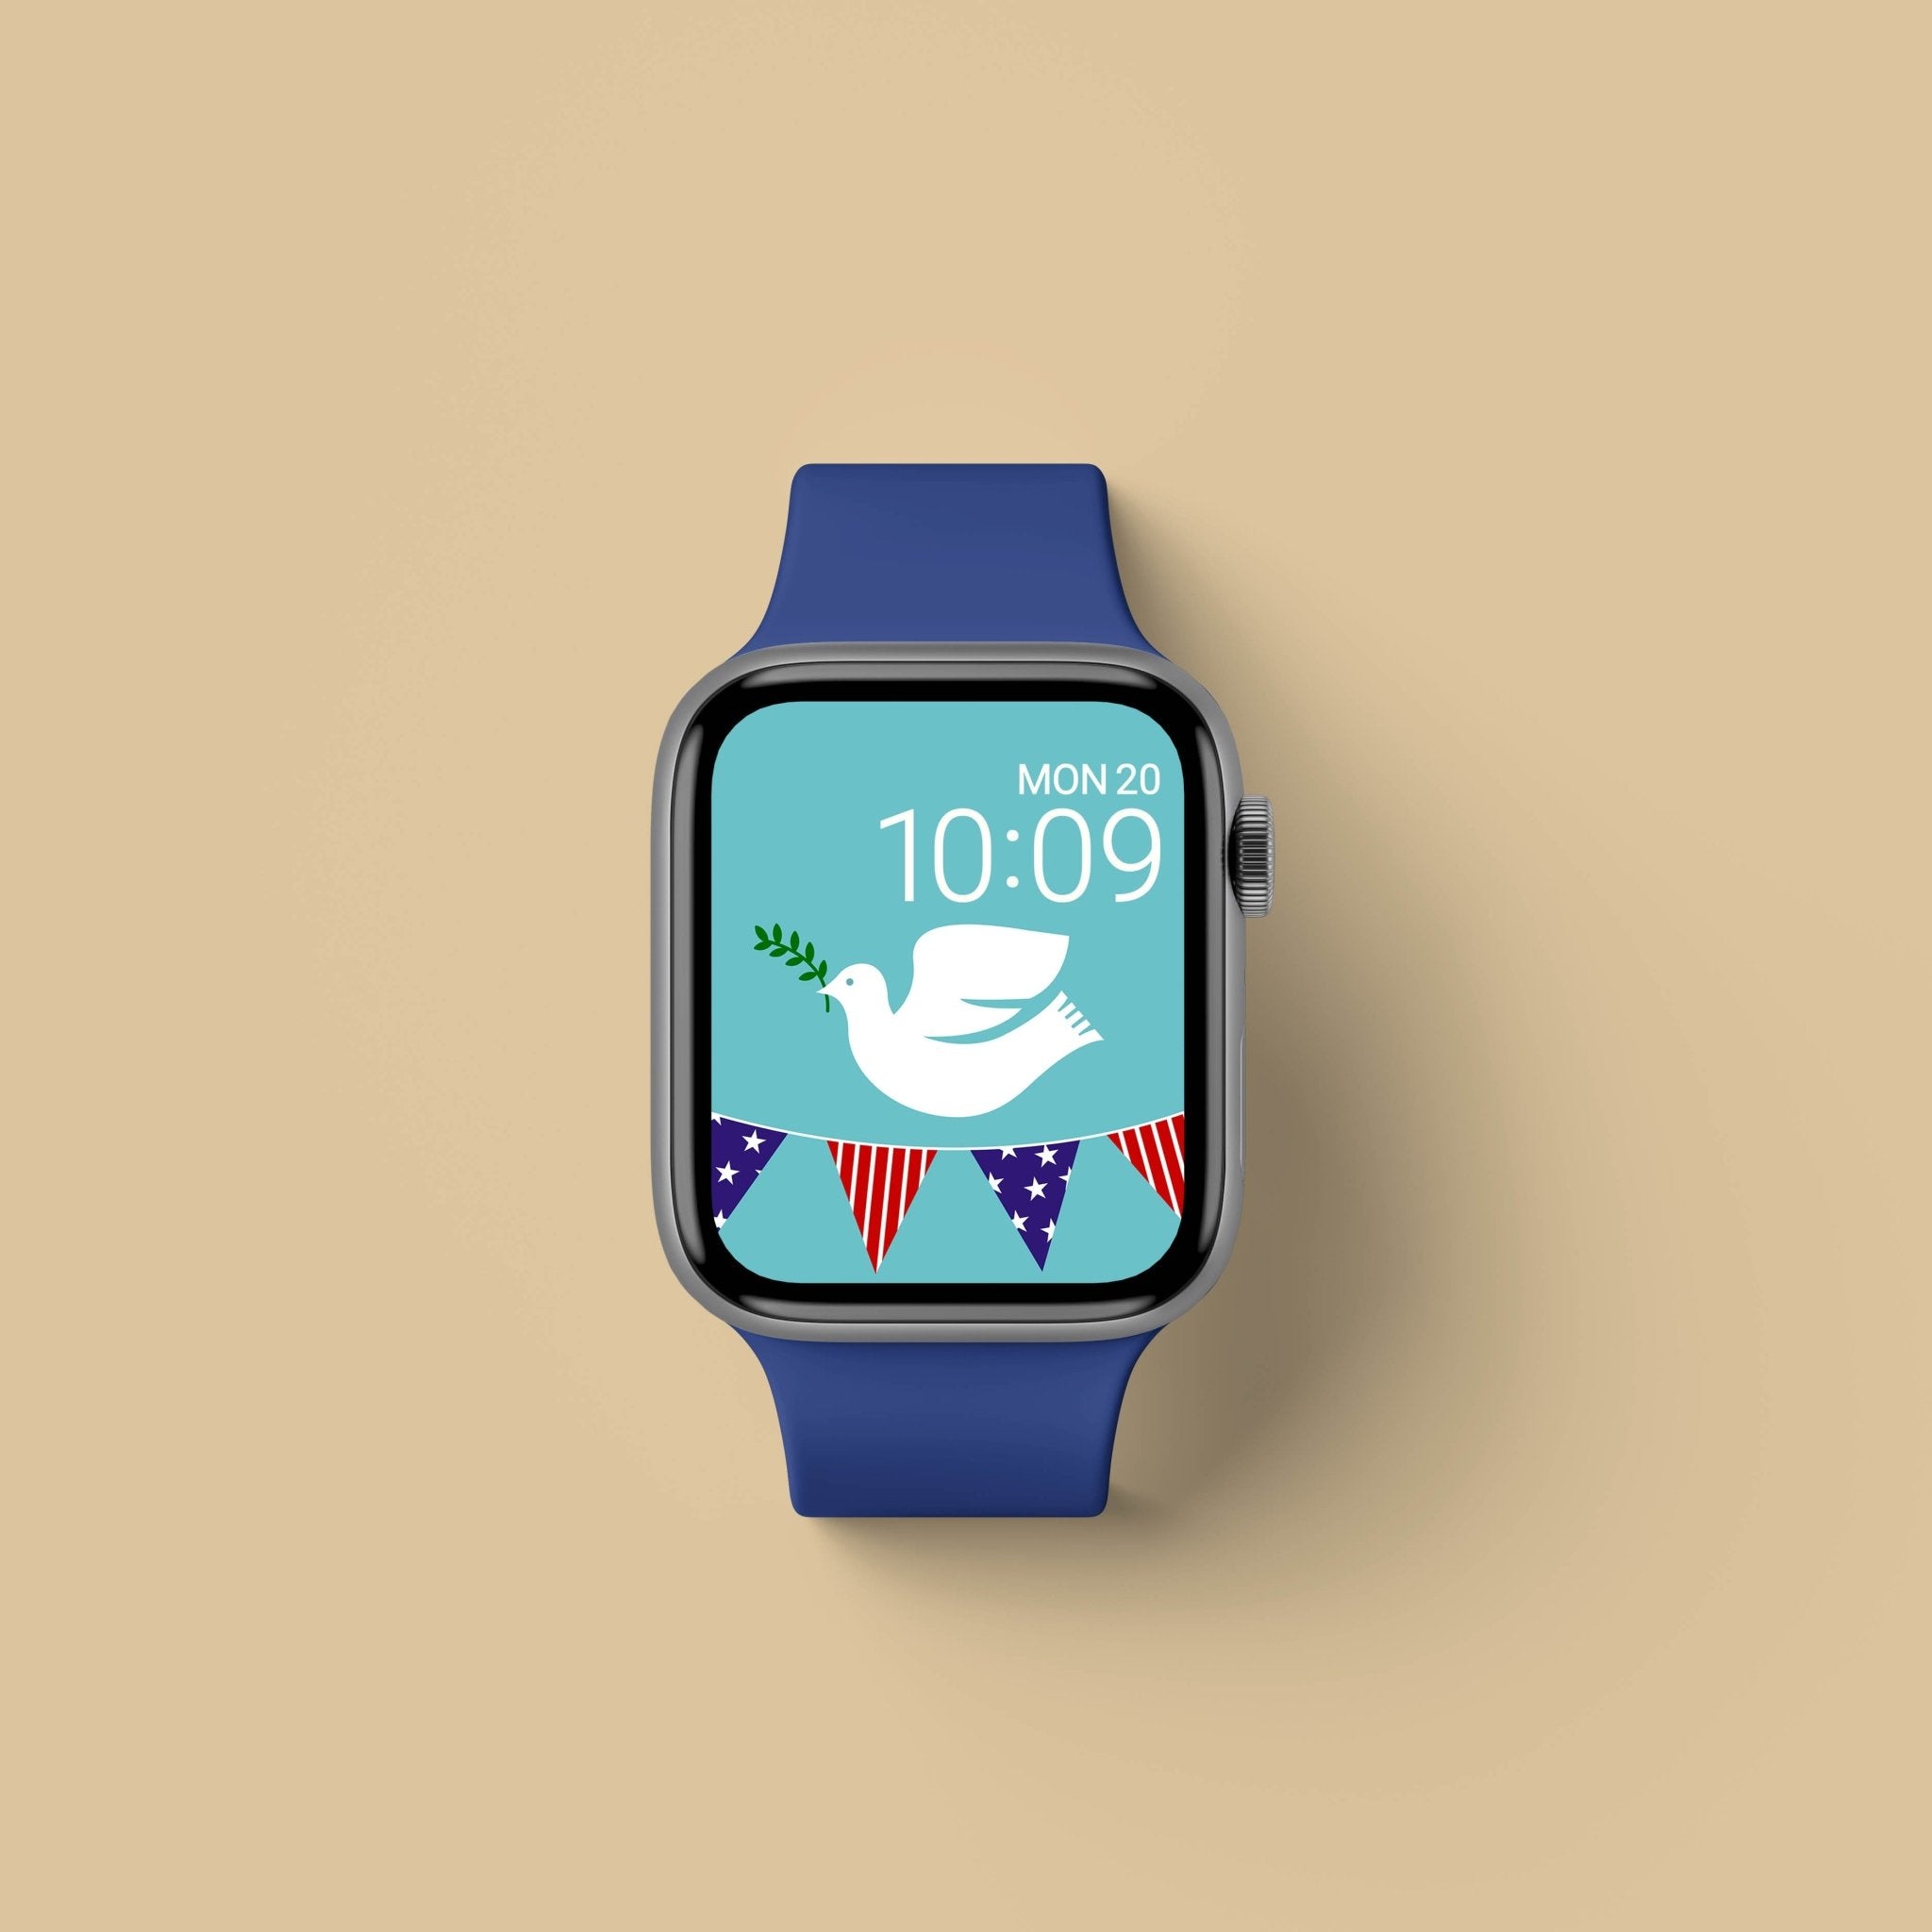 Wallpapers of the Month| Jan | Apple Watch Wallpapers - 4 Pack - Buckle and Band - JANWP